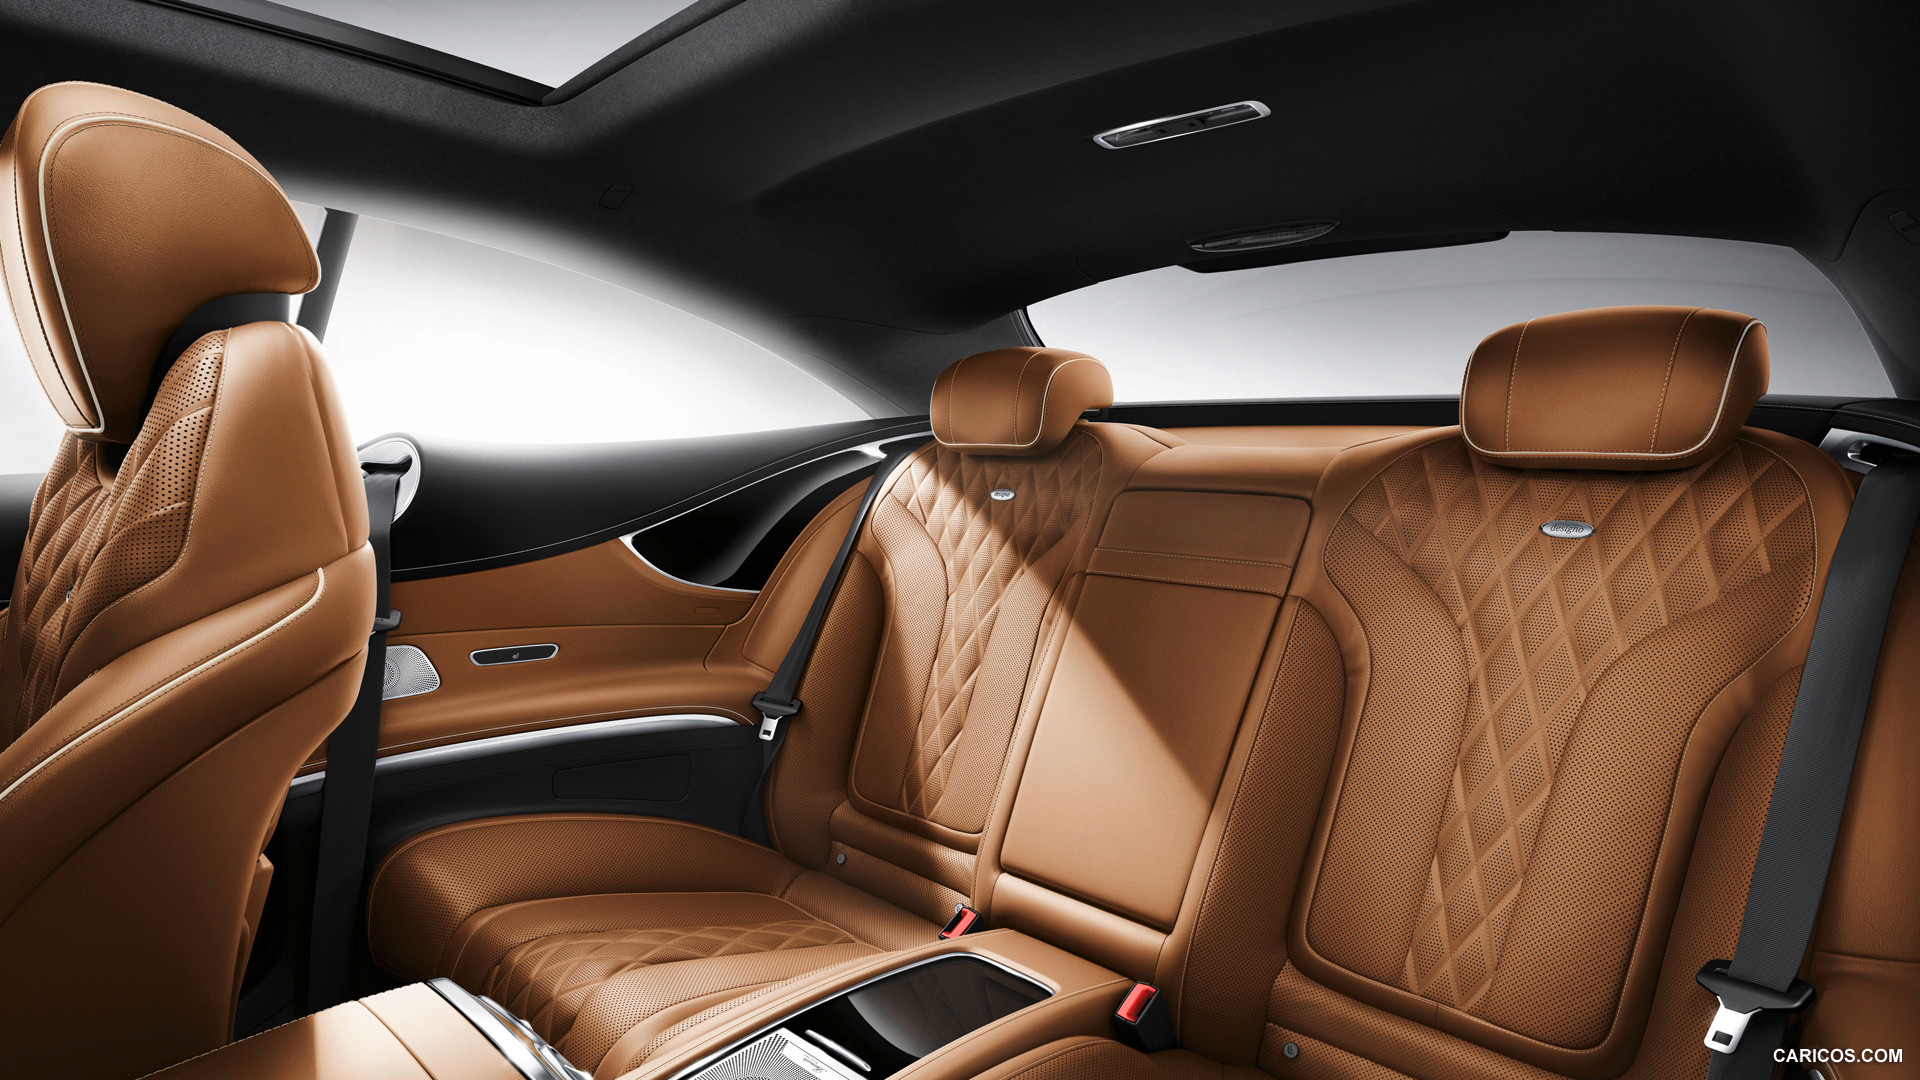 2015 Mercedes-Benz S-Class Coupe  - Interior Rear Seats, #82 of 145